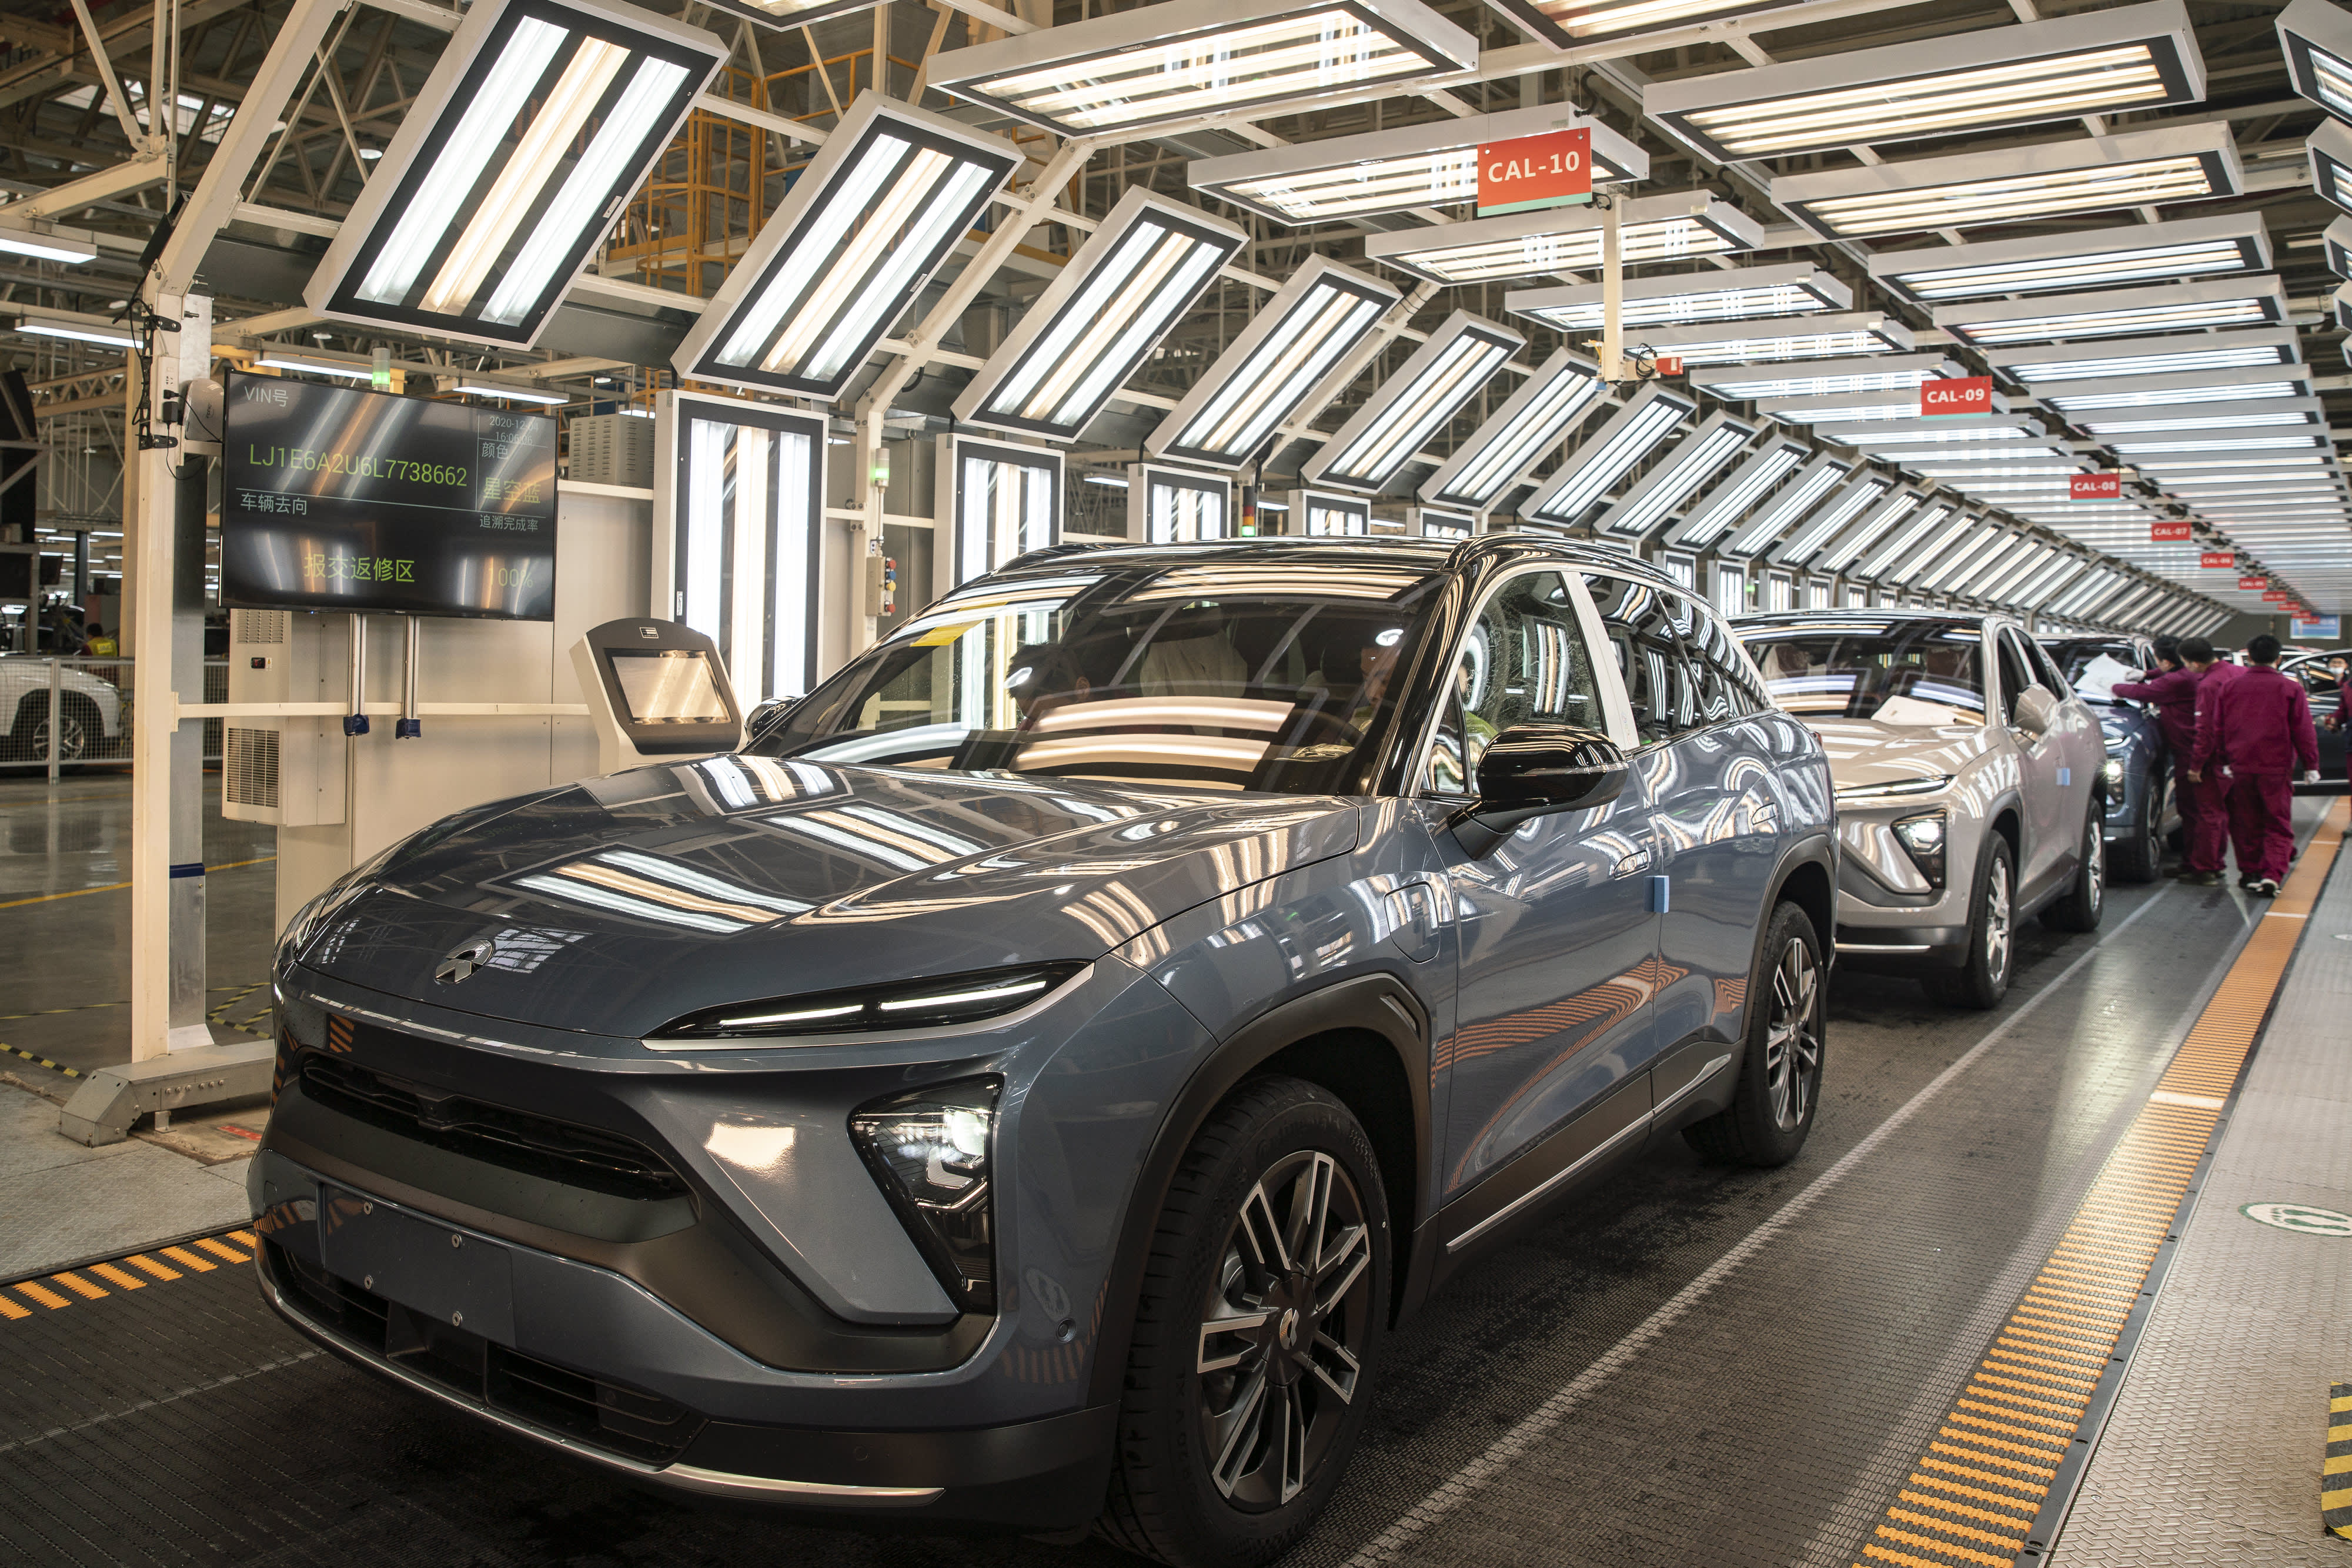 Chinese electric car startup Nio doubles deliveries as Tesla